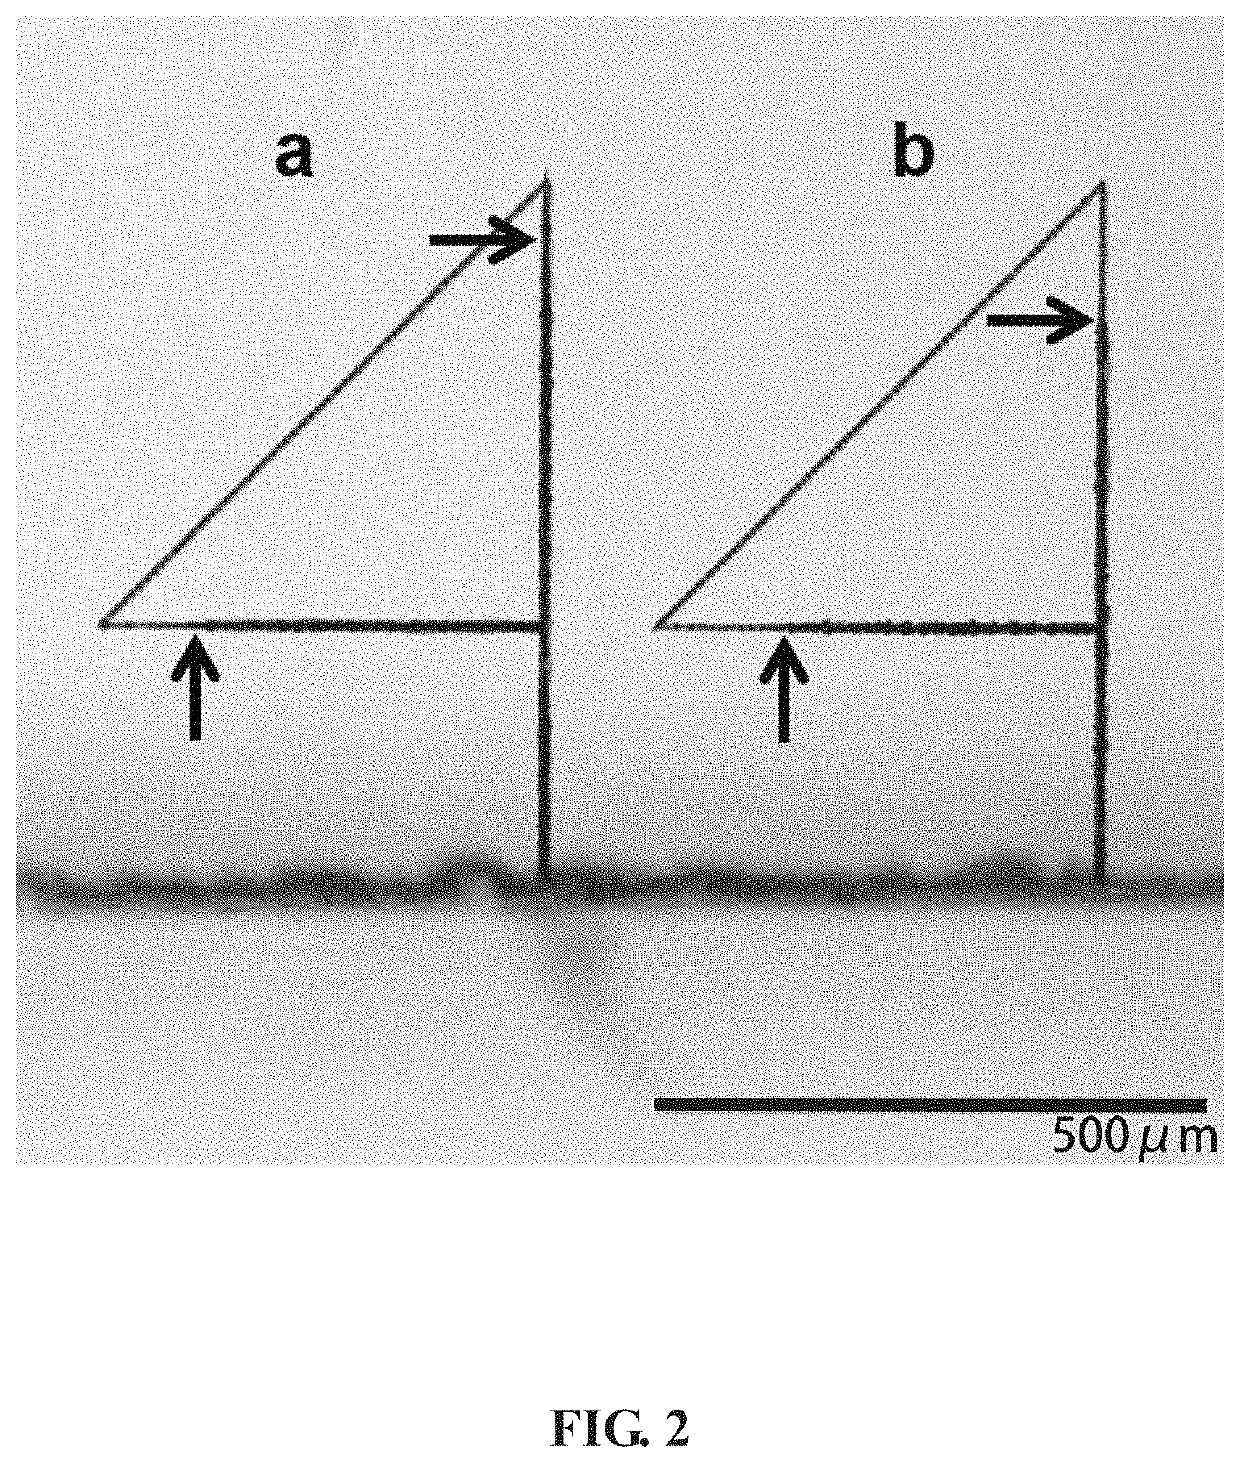 Method for fabricating microfluidic devices in fused silica by picosecond laser irradiation